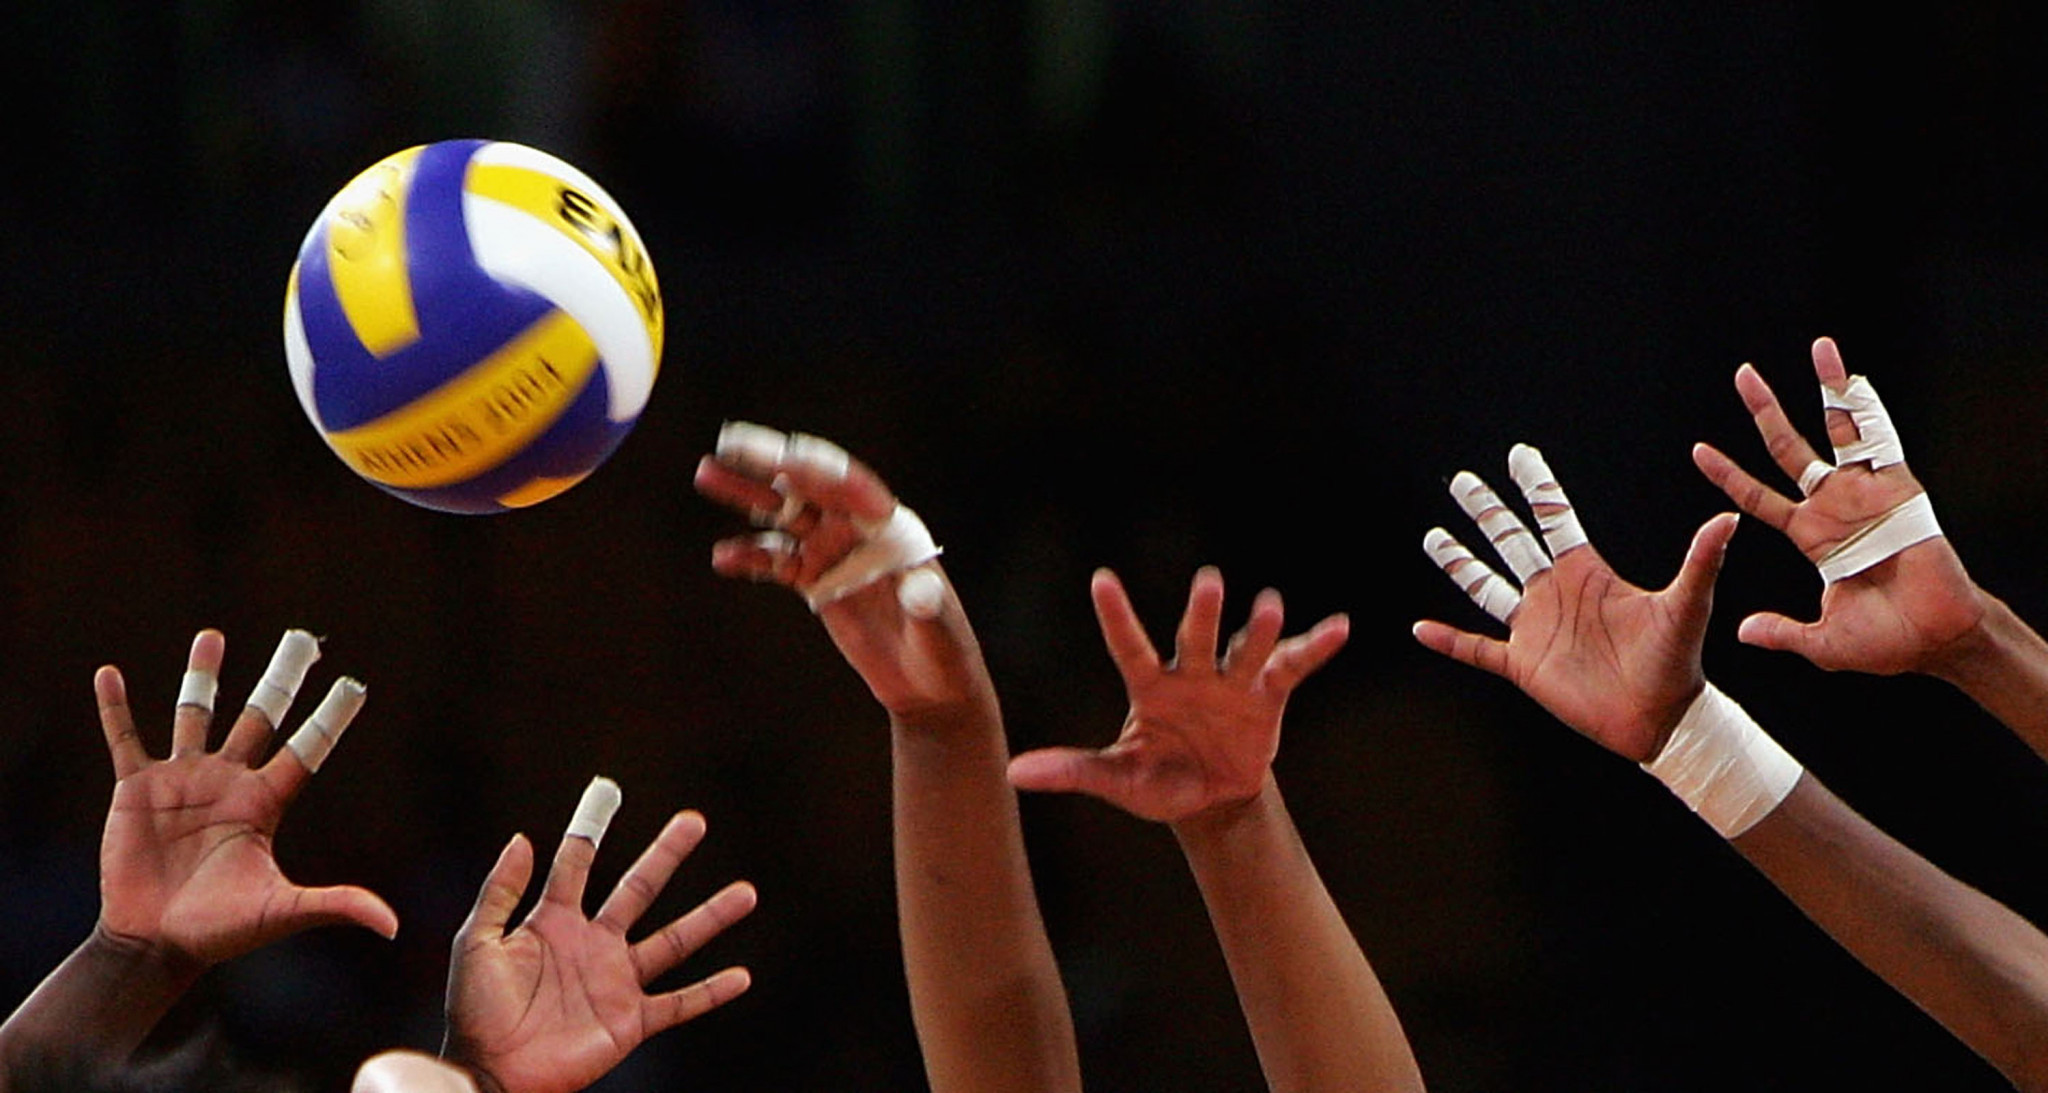 Sydney 2000 volleyball player Selina Scoble will have her project funded too ©Getty Images